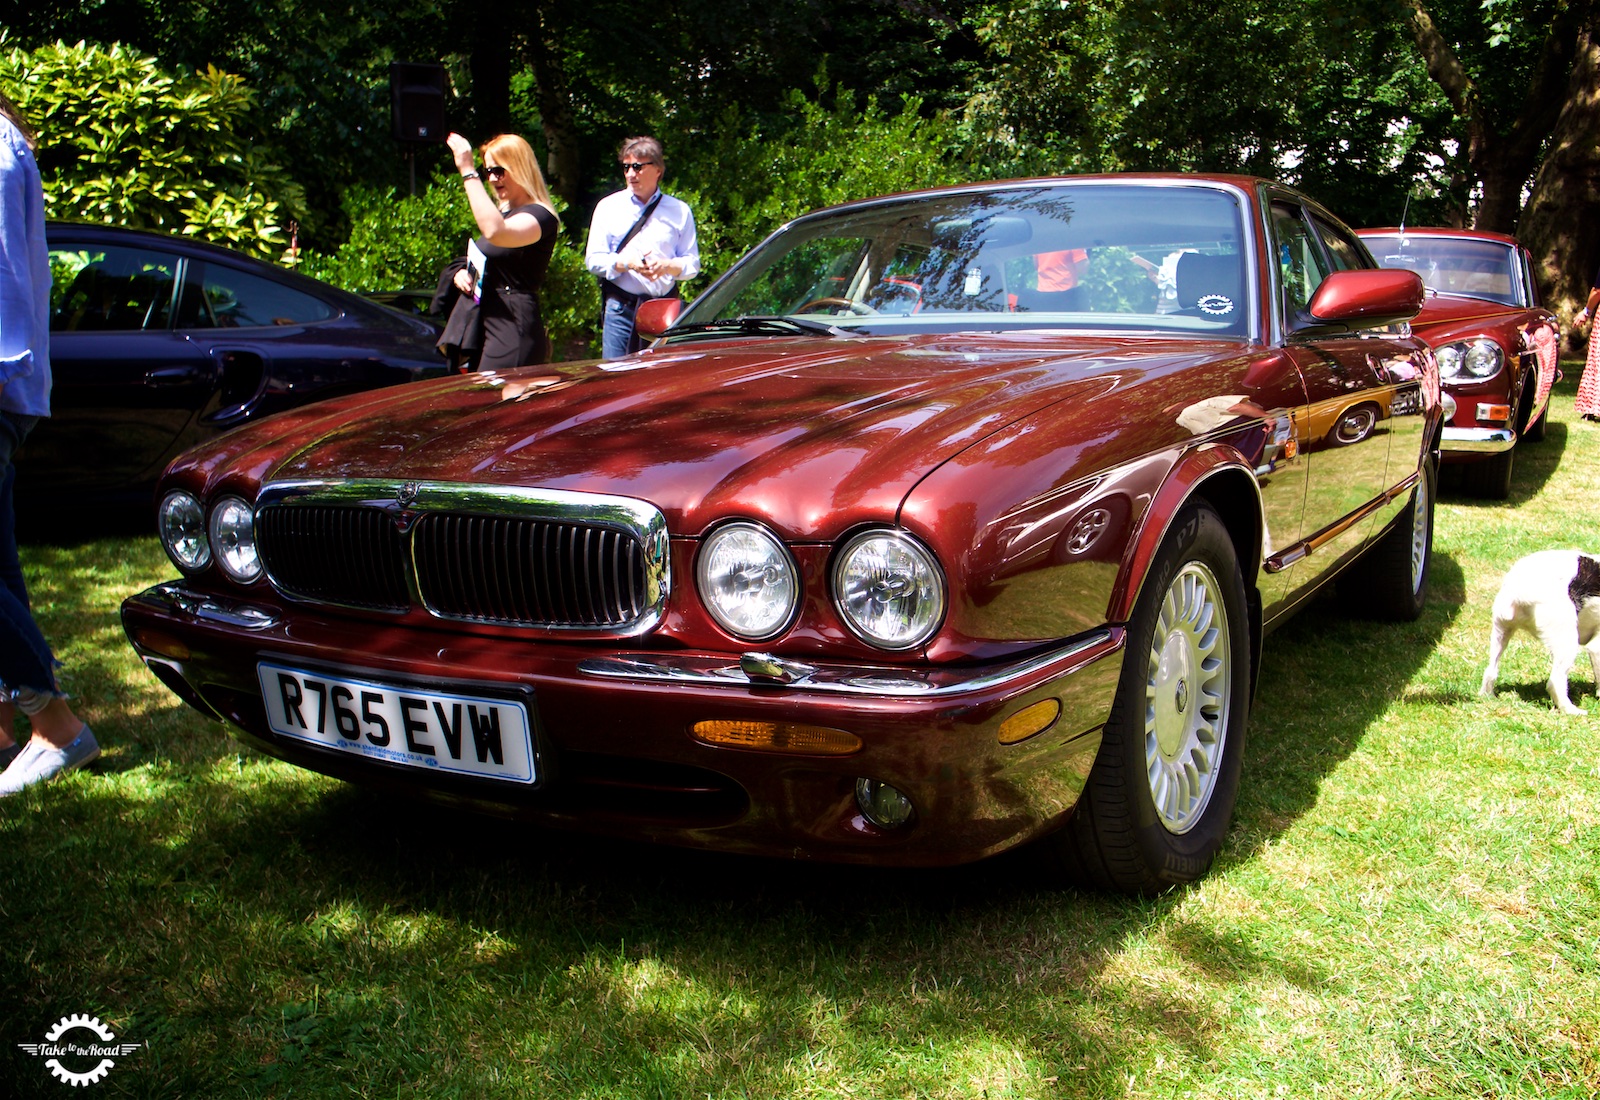 Take to the Road Belgravia Classic Car Show 2018 Highlights